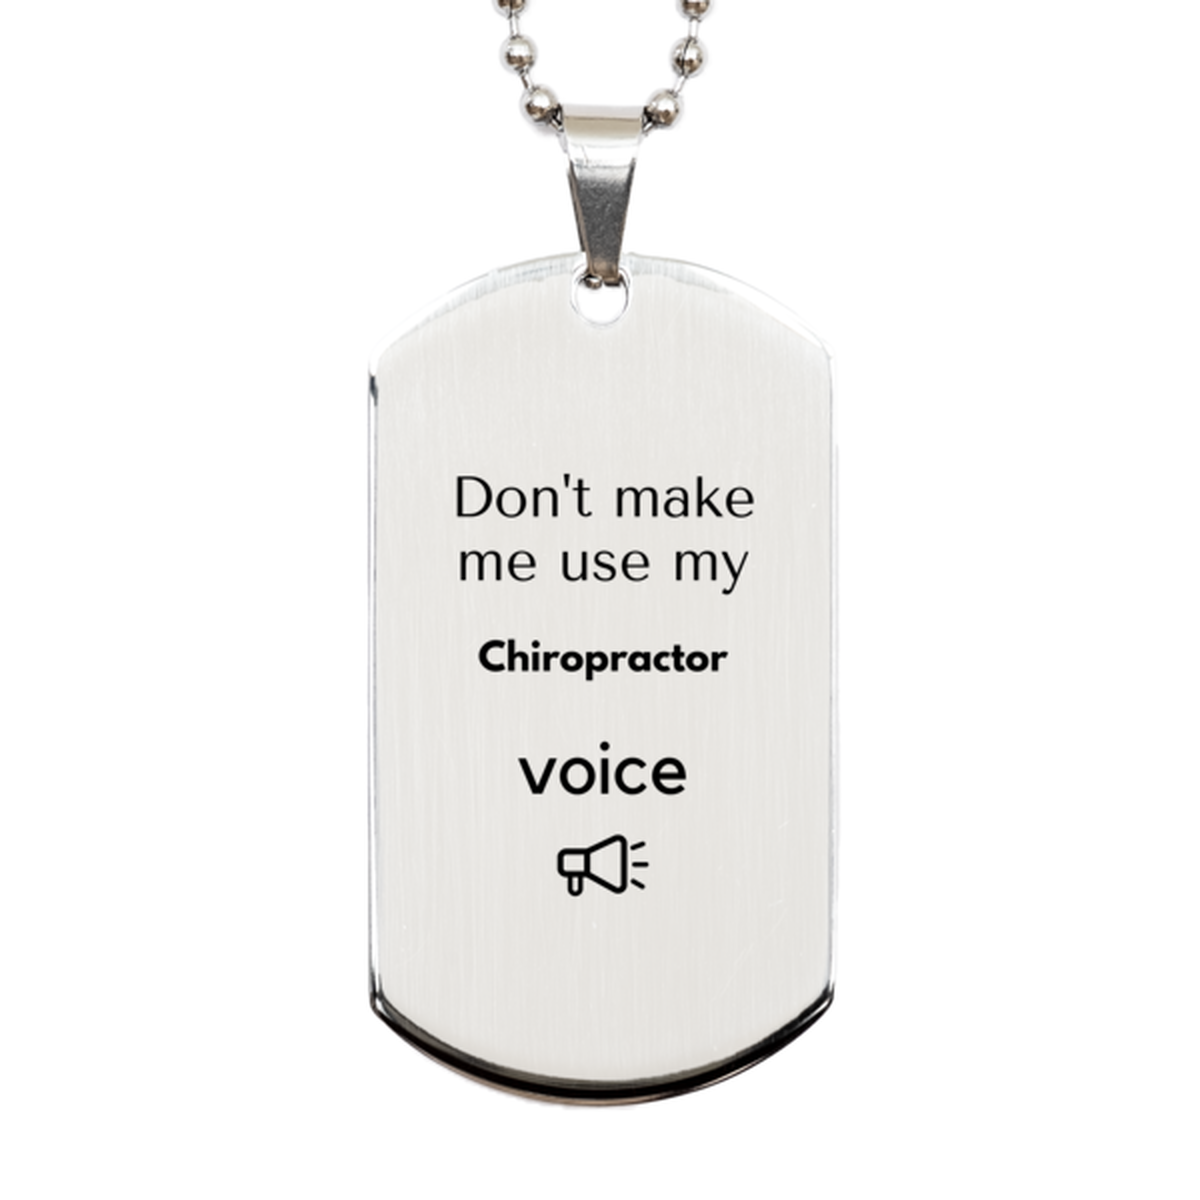 Don't make me use my Chiropractor voice, Sarcasm Chiropractor Gifts, Christmas Chiropractor Silver Dog Tag Birthday Unique Gifts For Chiropractor Coworkers, Men, Women, Colleague, Friends